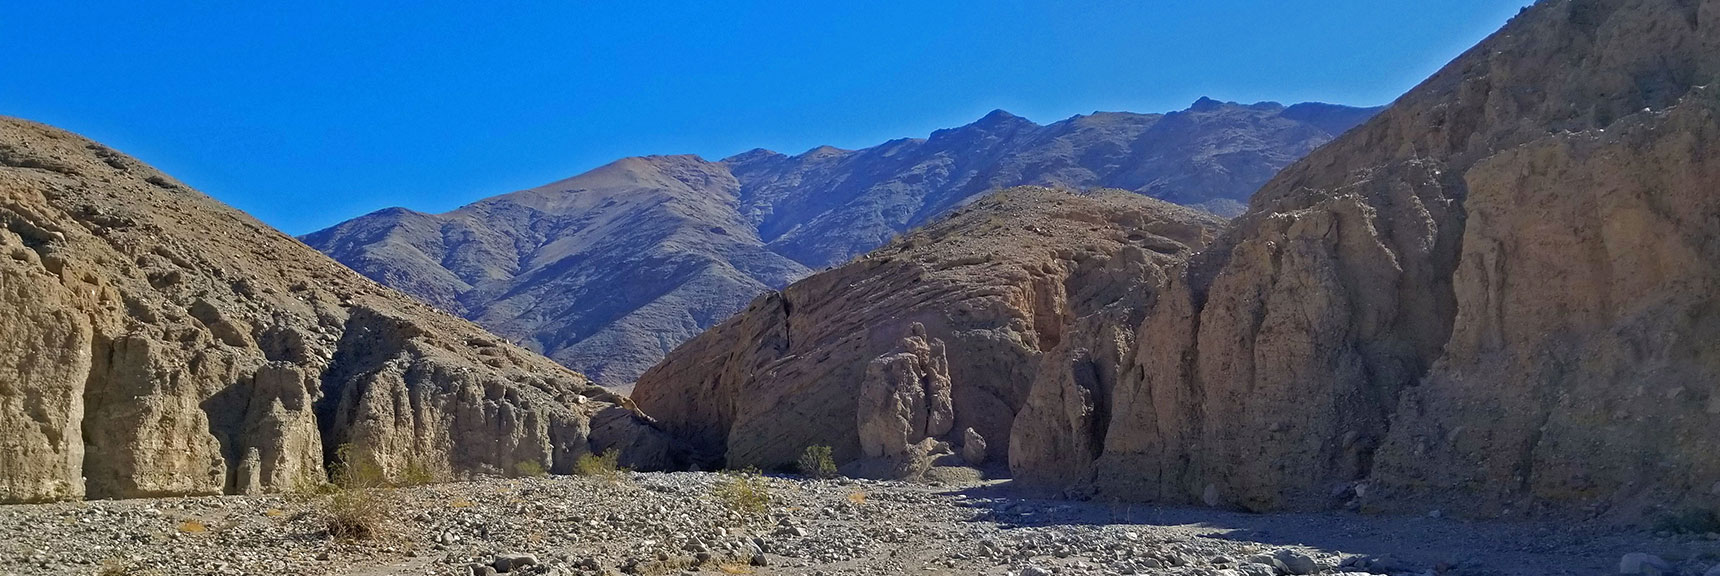 Looking Up the Main Canyon Toward the Black Mountains | Sidewinder Canyon | Death Valley National Park, California